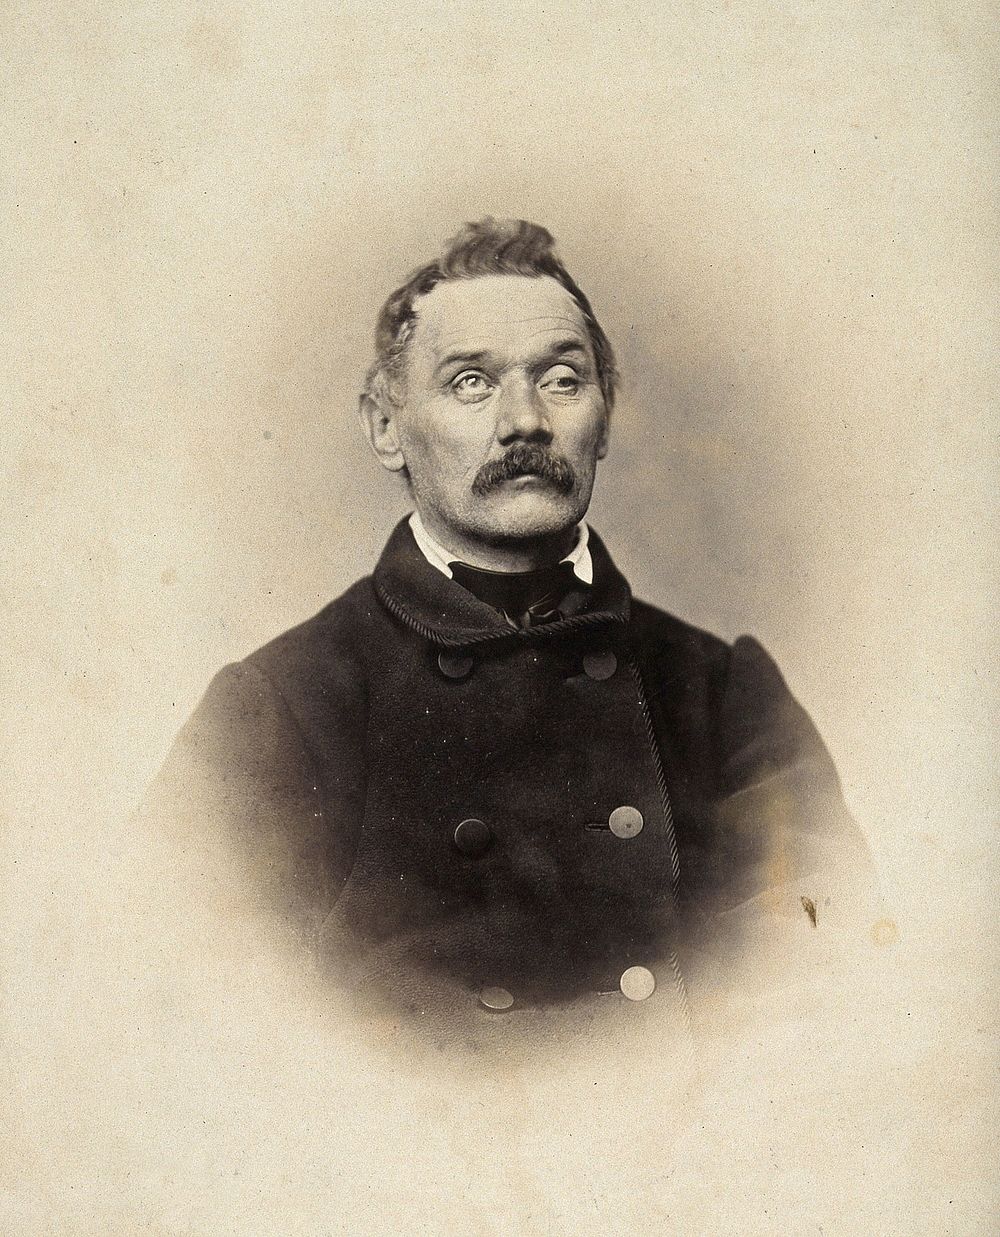 A man, head and shoulders; his left eyelid is heavy and his right eye is raised. Photograph by L. Haase after H.W. Berend…